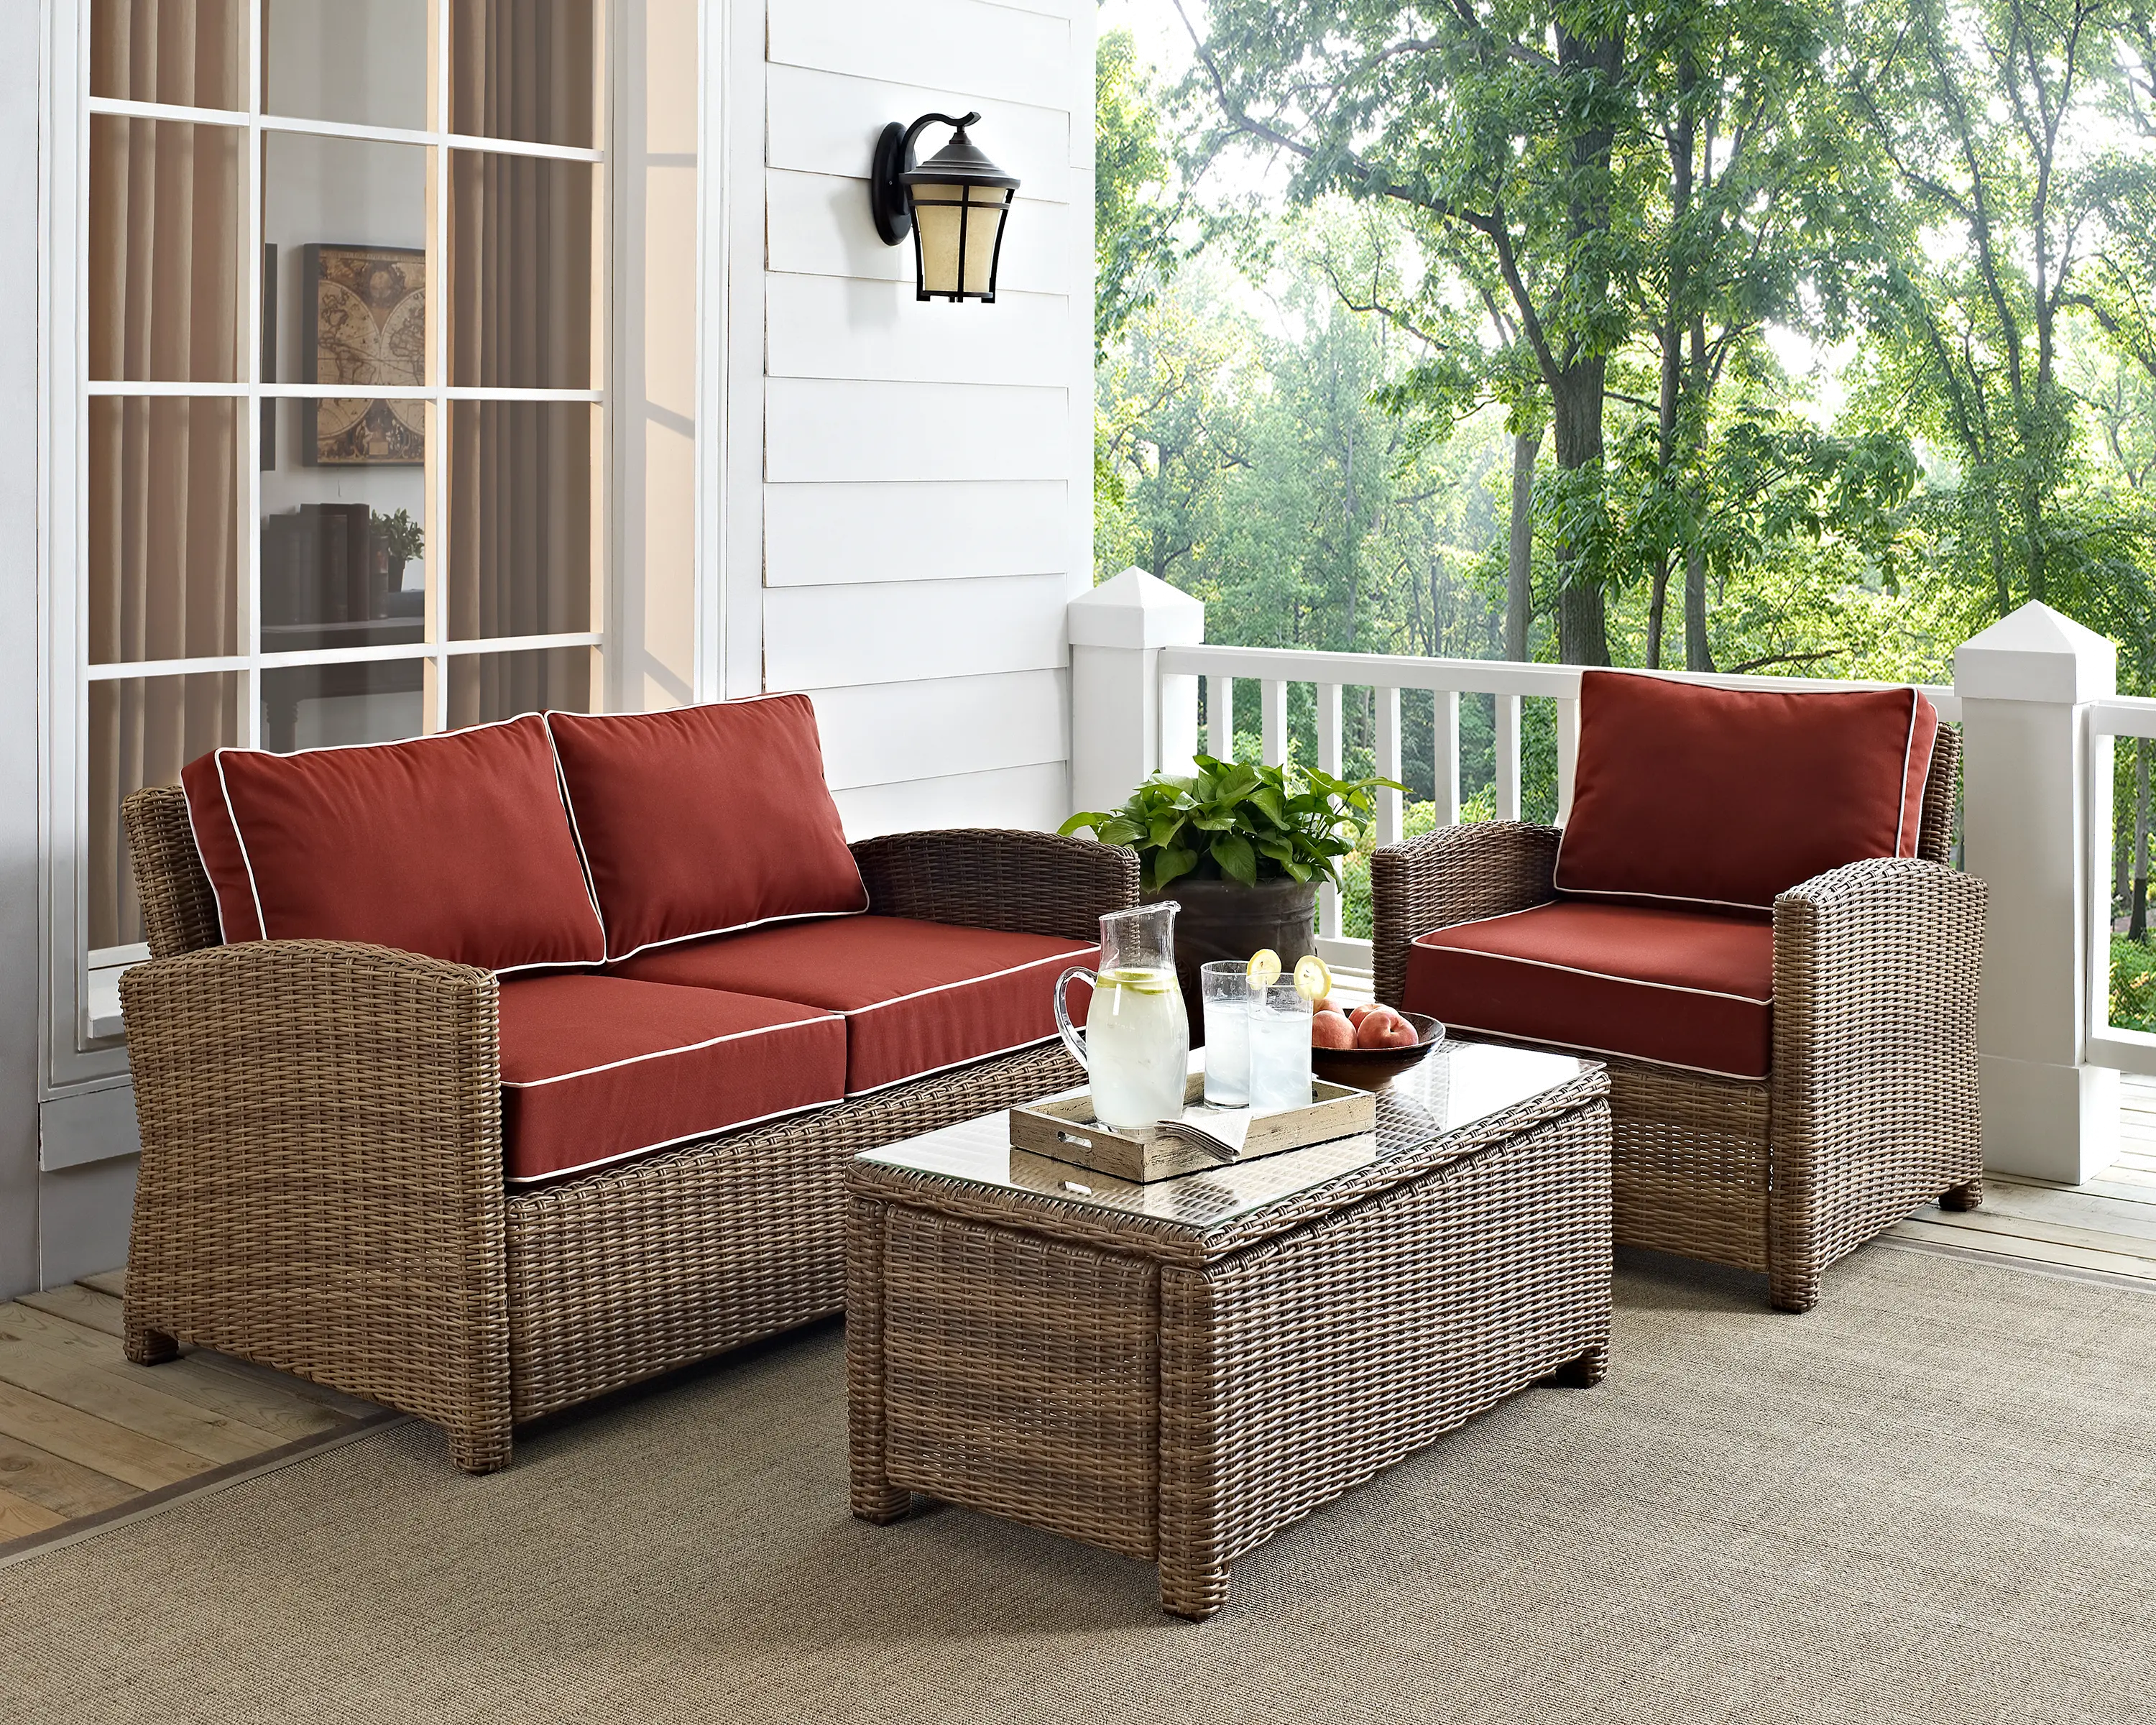 Bradenton Sangria and Wicker 3 pc Loveseat, Armchair, and Table